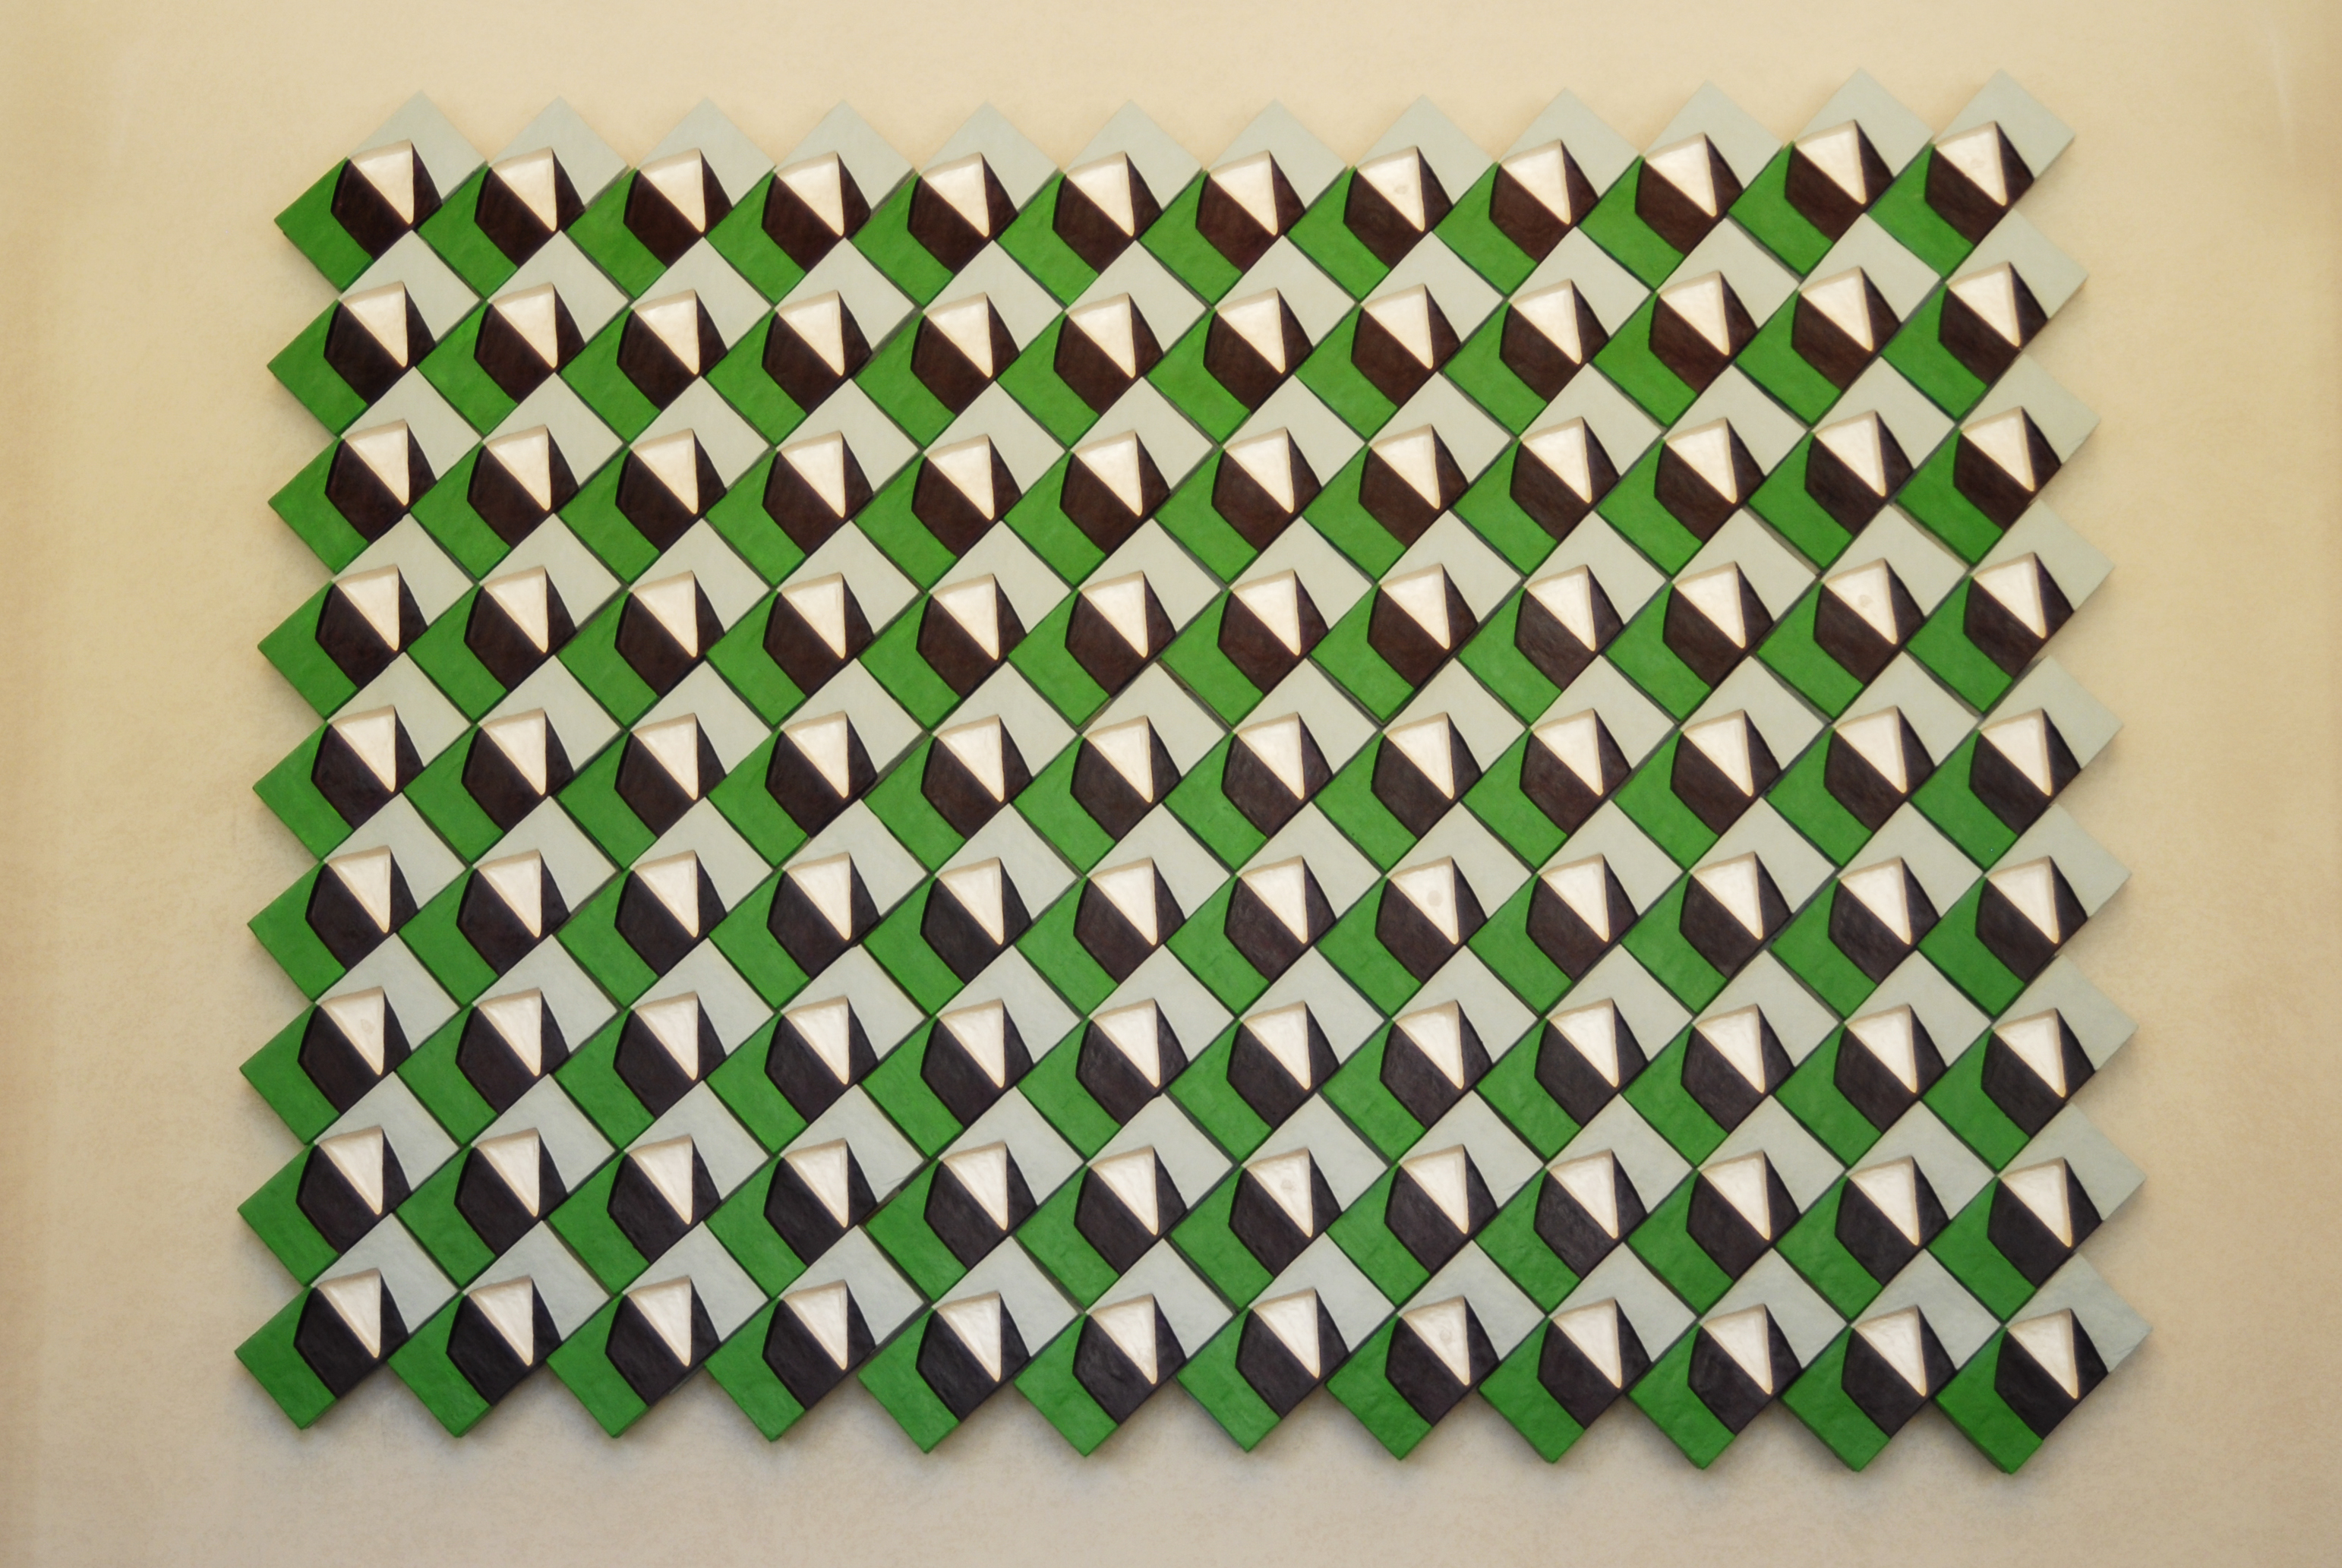 Green, navy, and light blue geometric tiles form a tessellation. 